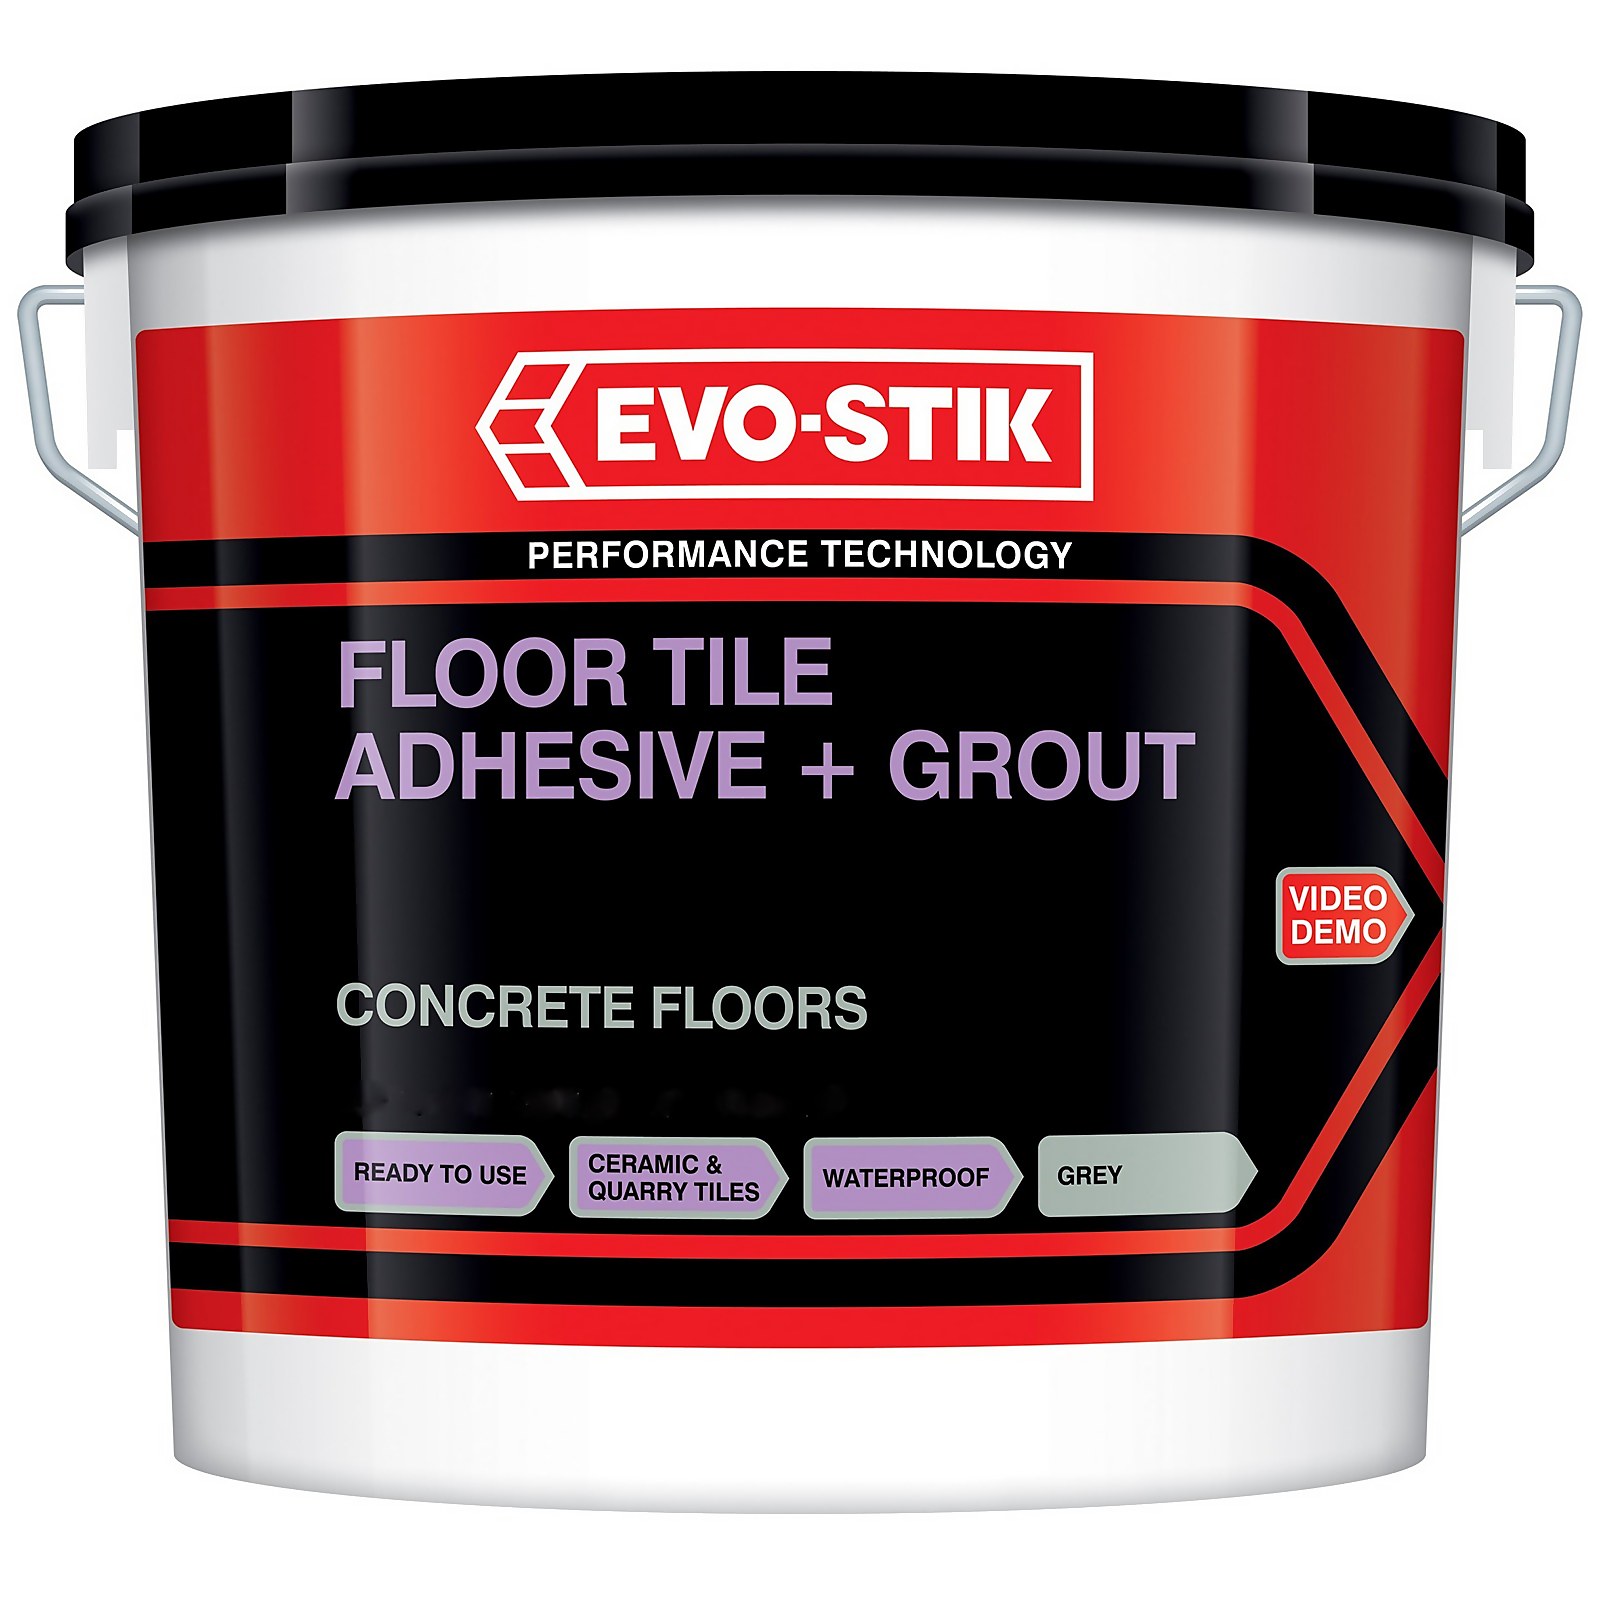 Photo of Evo-stik Floor Tile Adhesive And Grout For Concrete Floors